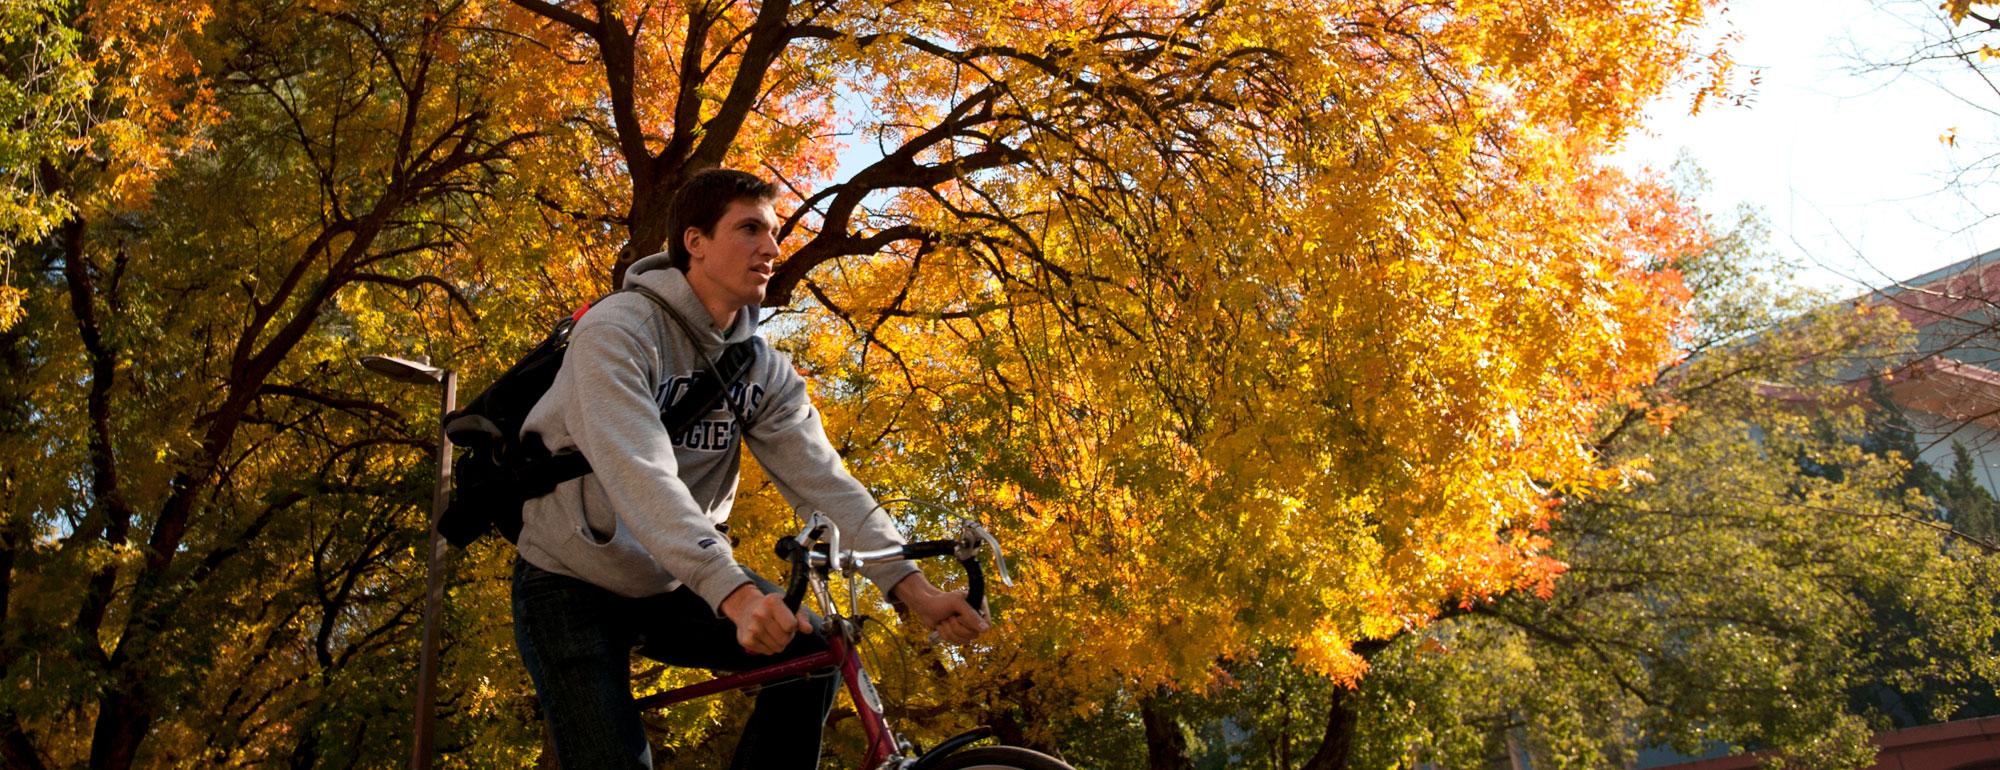 A male student rides his bicycle under the Fall foliage on the 澳门六合彩开奖结果走势图 campus